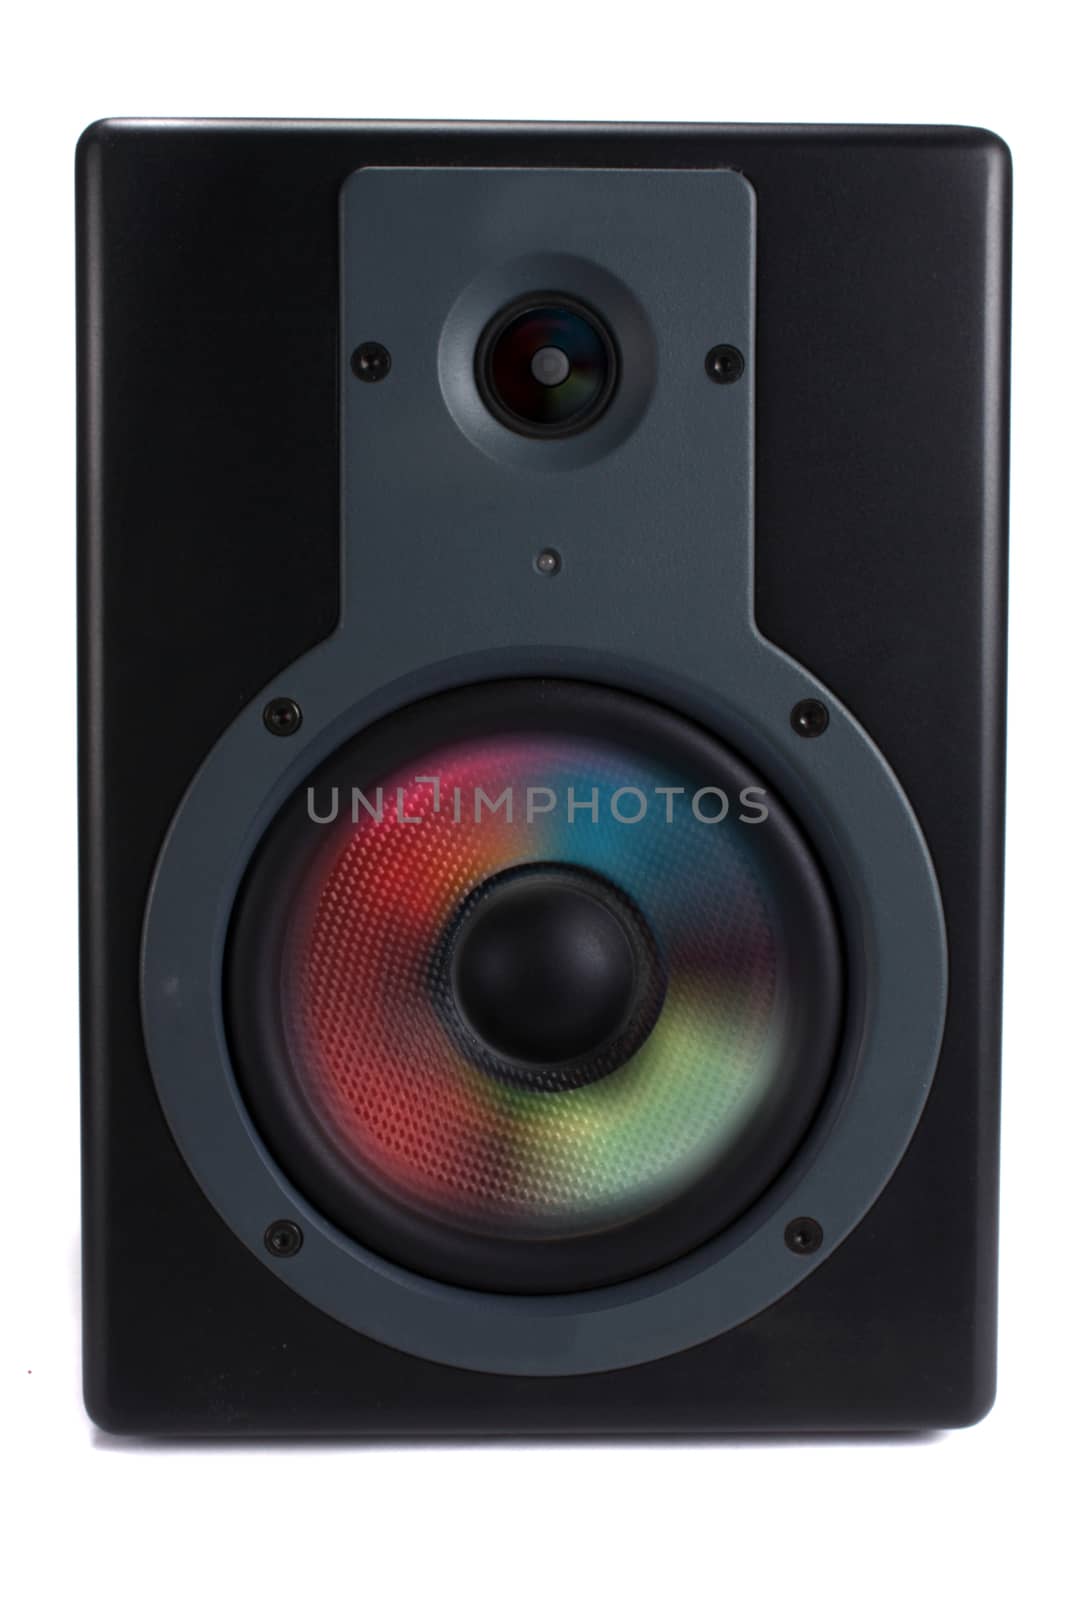 A unique speaker concept with a CD design on its woofer and twitter.